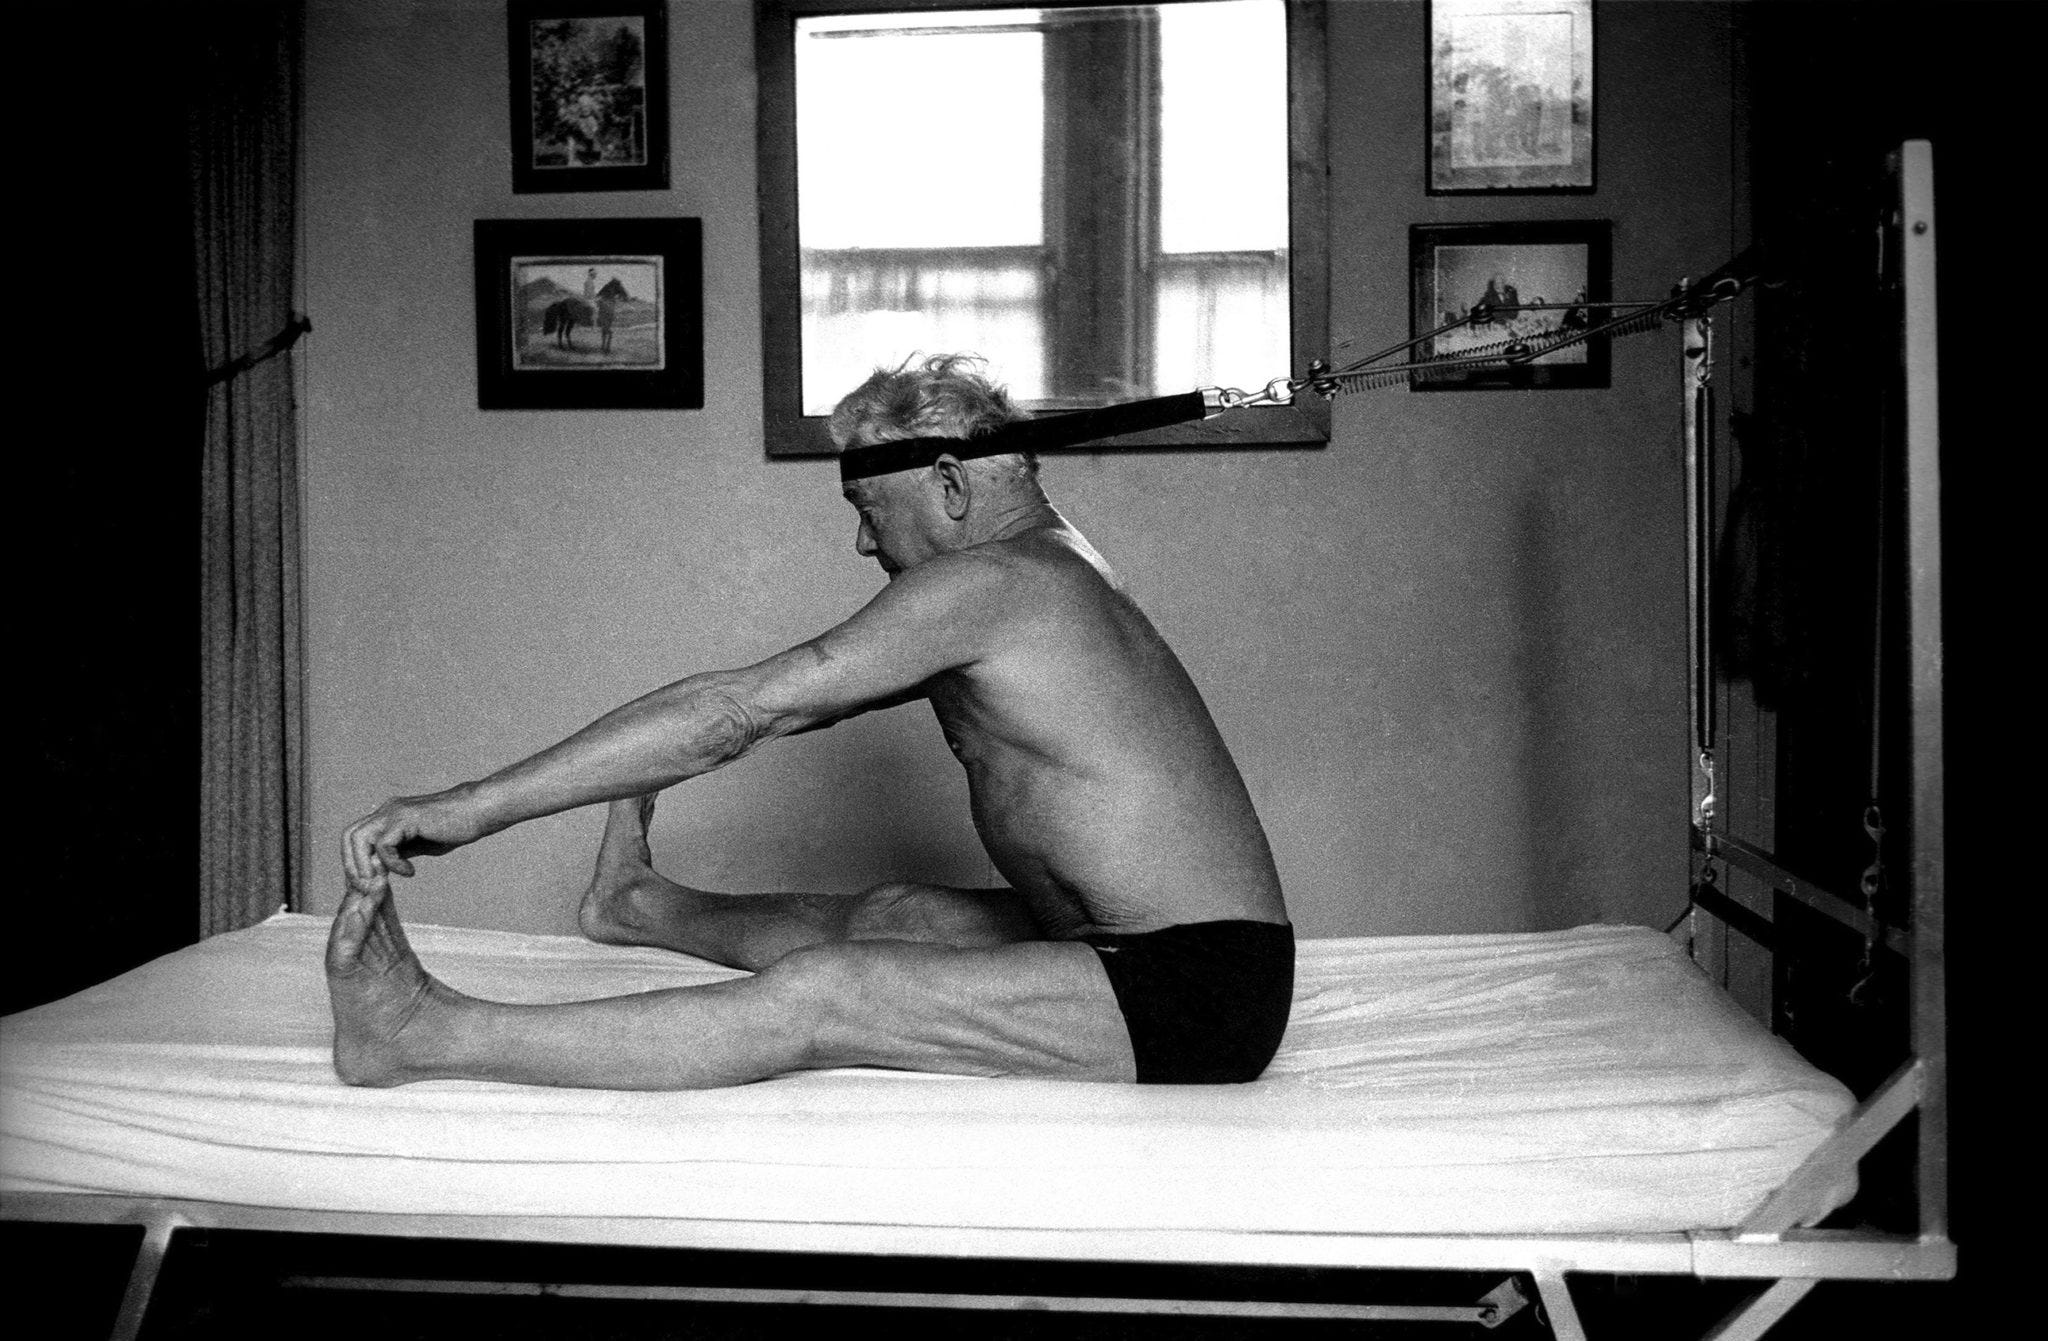 The Acrobatic Immigrant Who Invented Pilates in a Prisoner of War Camp